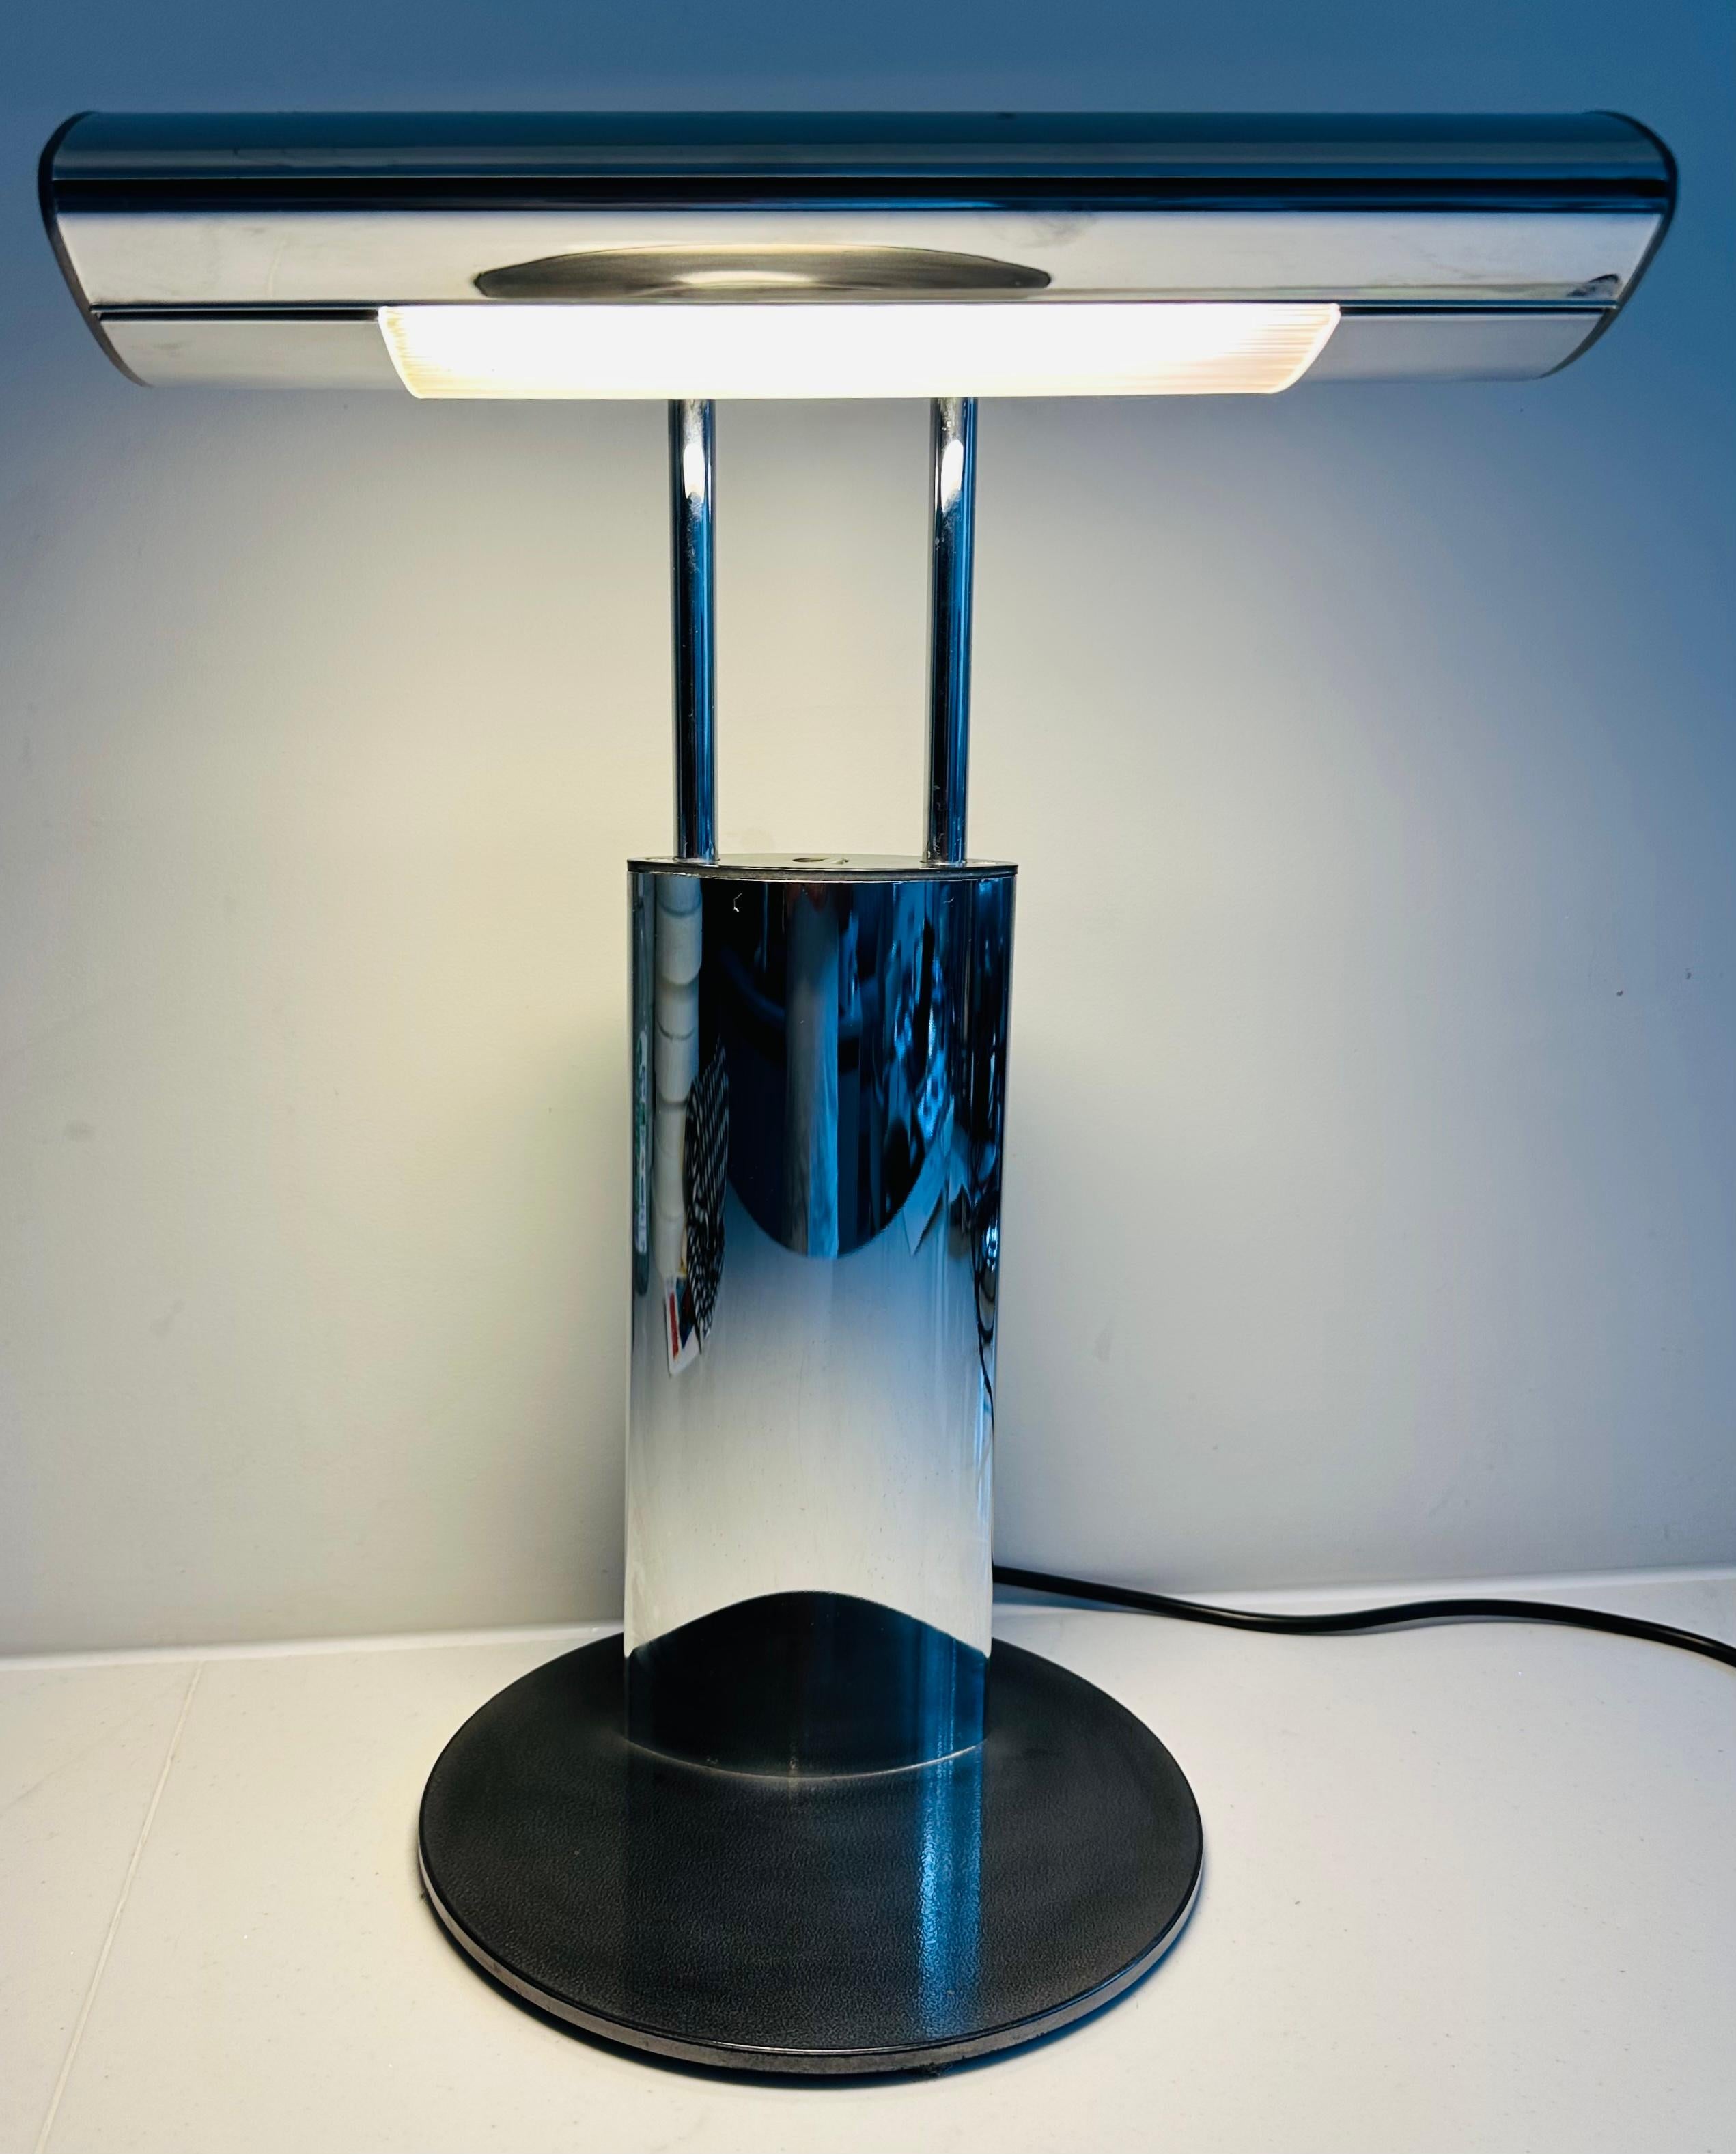 Vintage 1980s German attributed to Wofi Leuchten GMBH chrome and black lacquered adjustable light desk lamp.  The on/off switch is situated between the two upright rods which hold the light canopy.  The lightbulb is situated behind a plastic ribbed